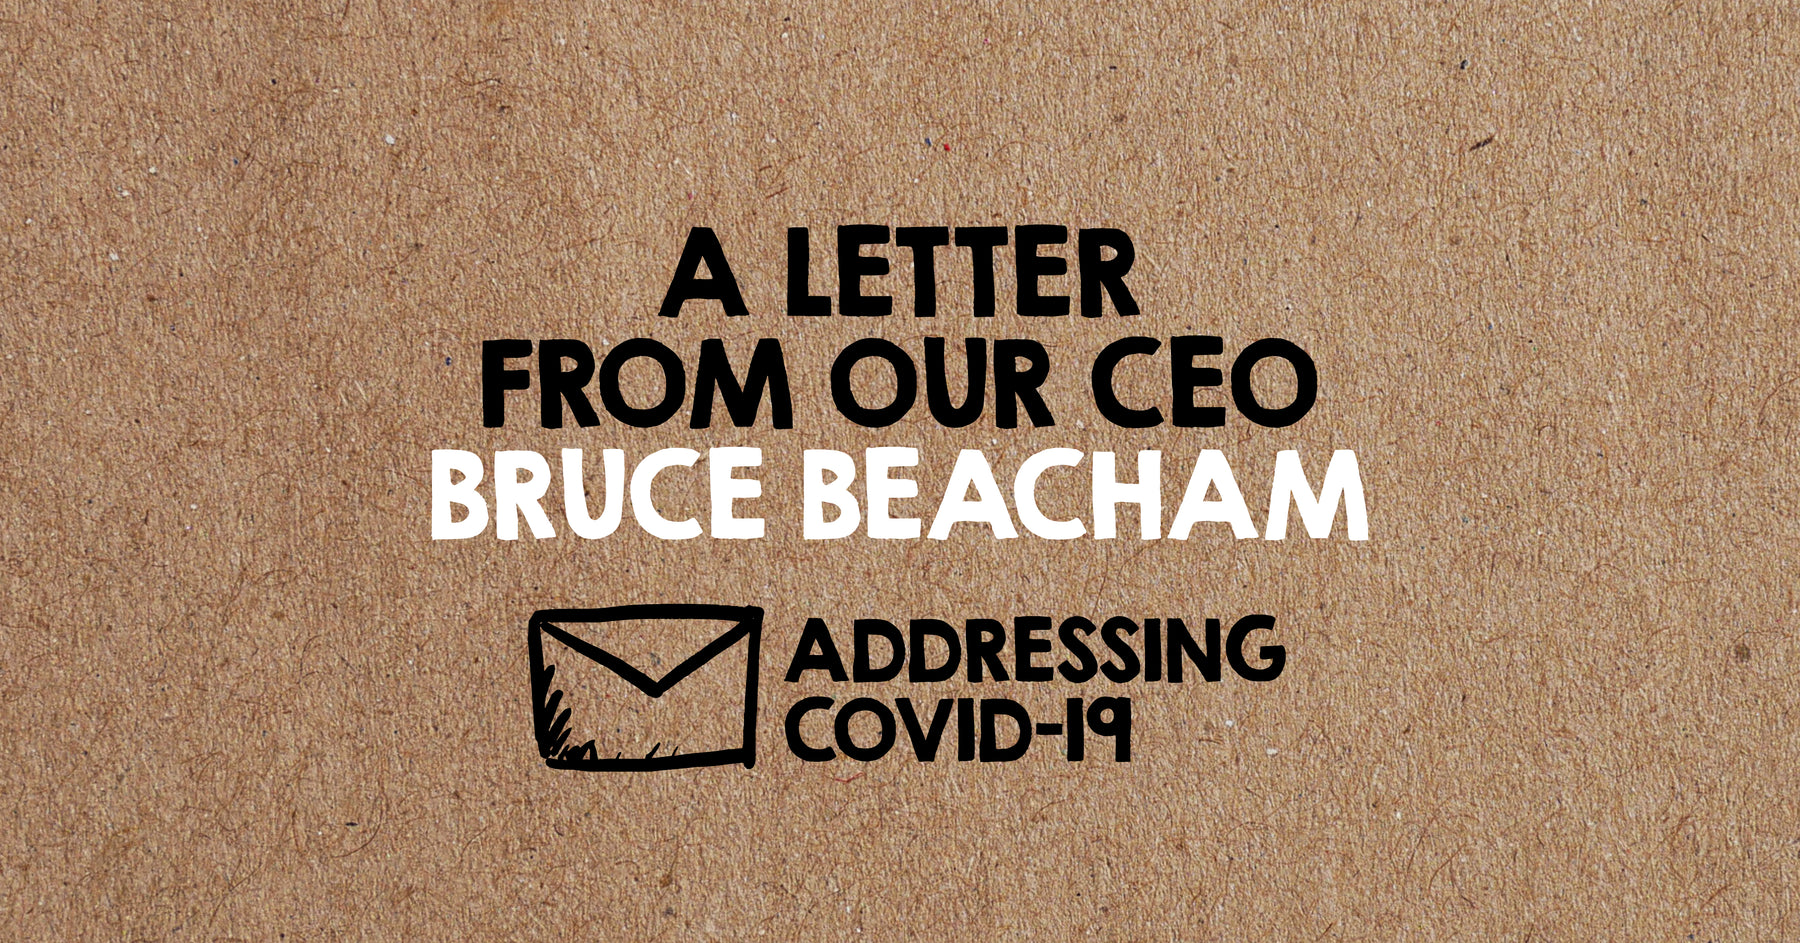 A Letter From our CEO Bruce Beacham: Addressing COVID-19